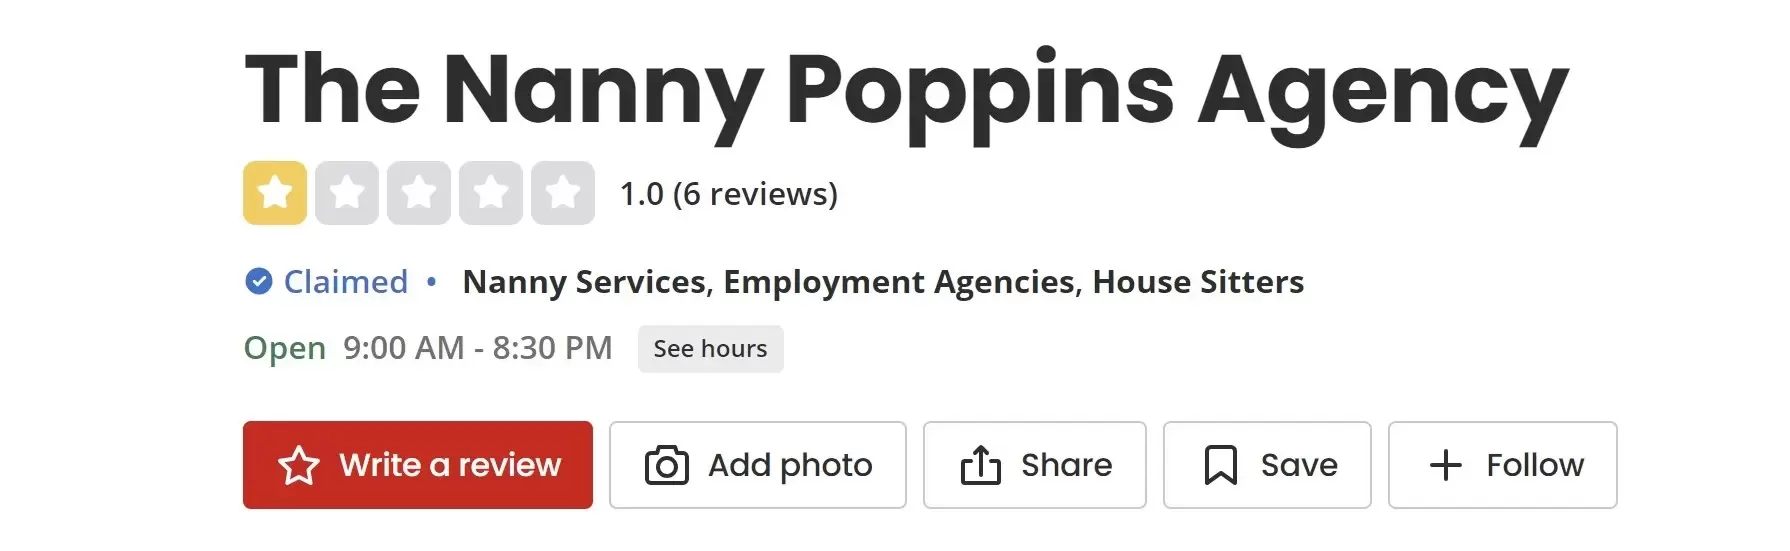 positive review of The Nanny Poppins Agency